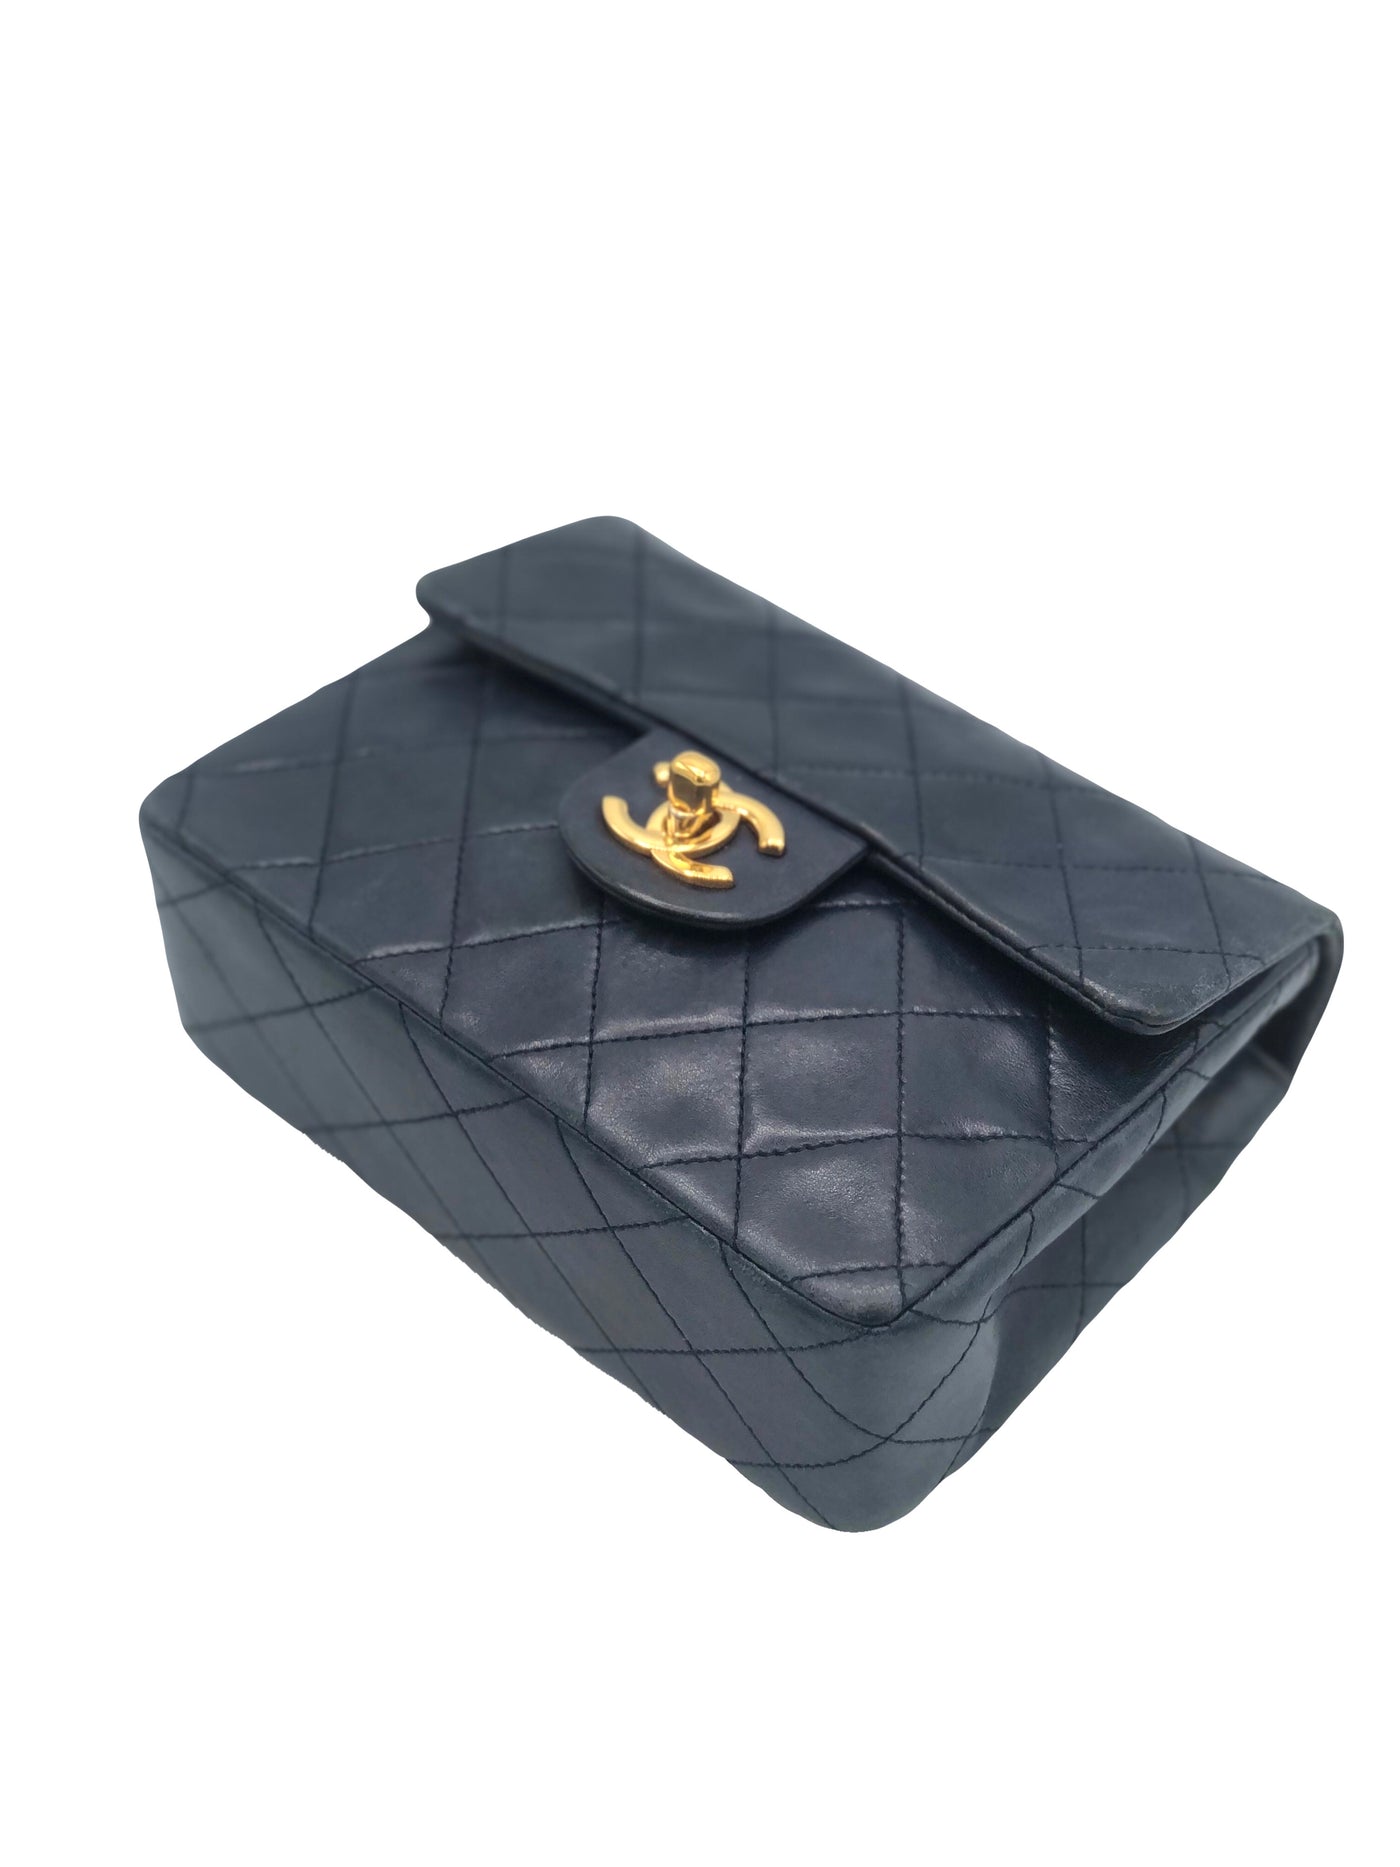 CHANEL vintage 1989-1991 navy mini square lambskin 24ct gold